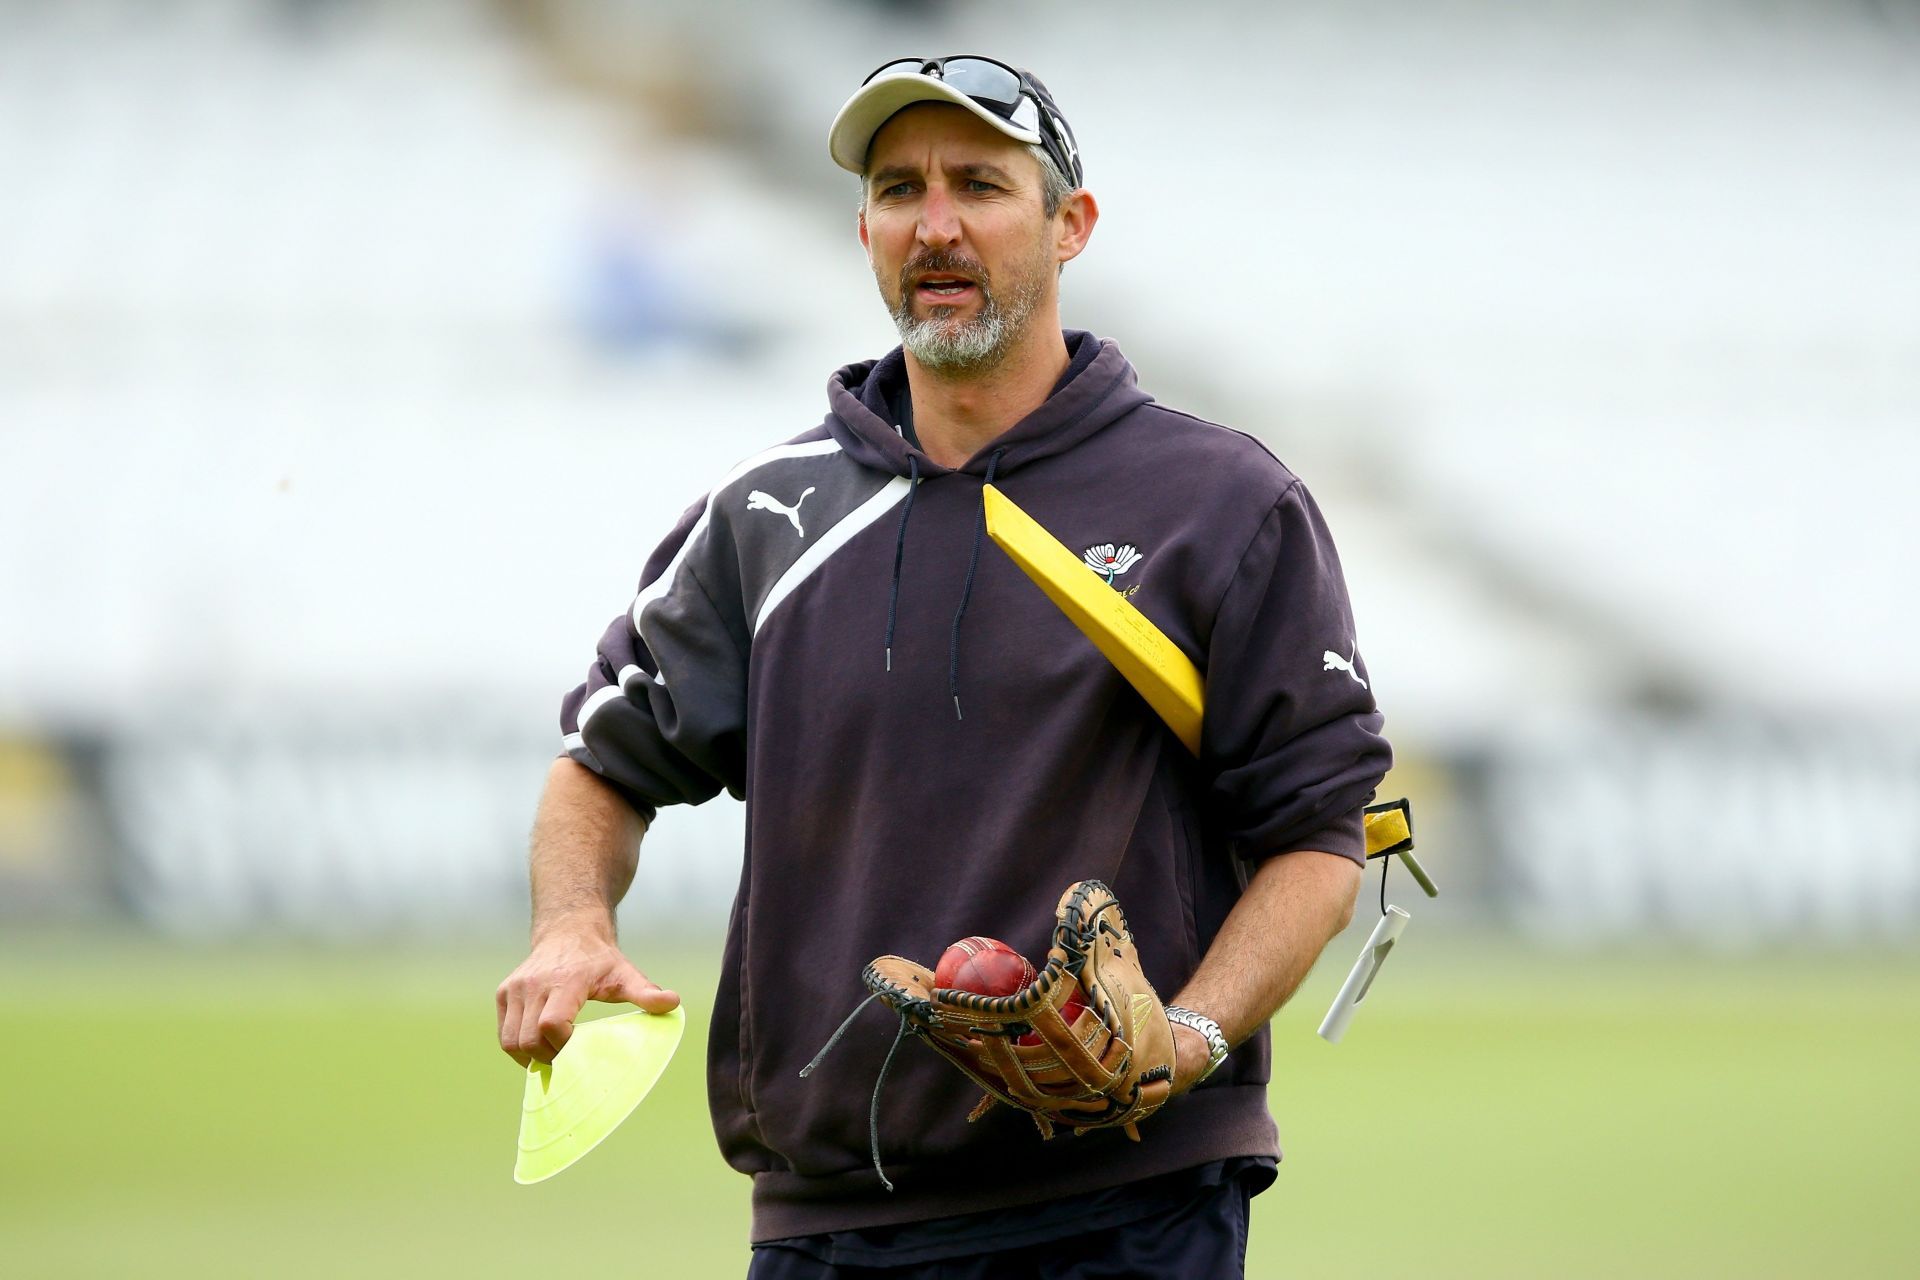 Jason Gillespie is one of the most iconic Australian bowlers from the 1990s and 2000s.